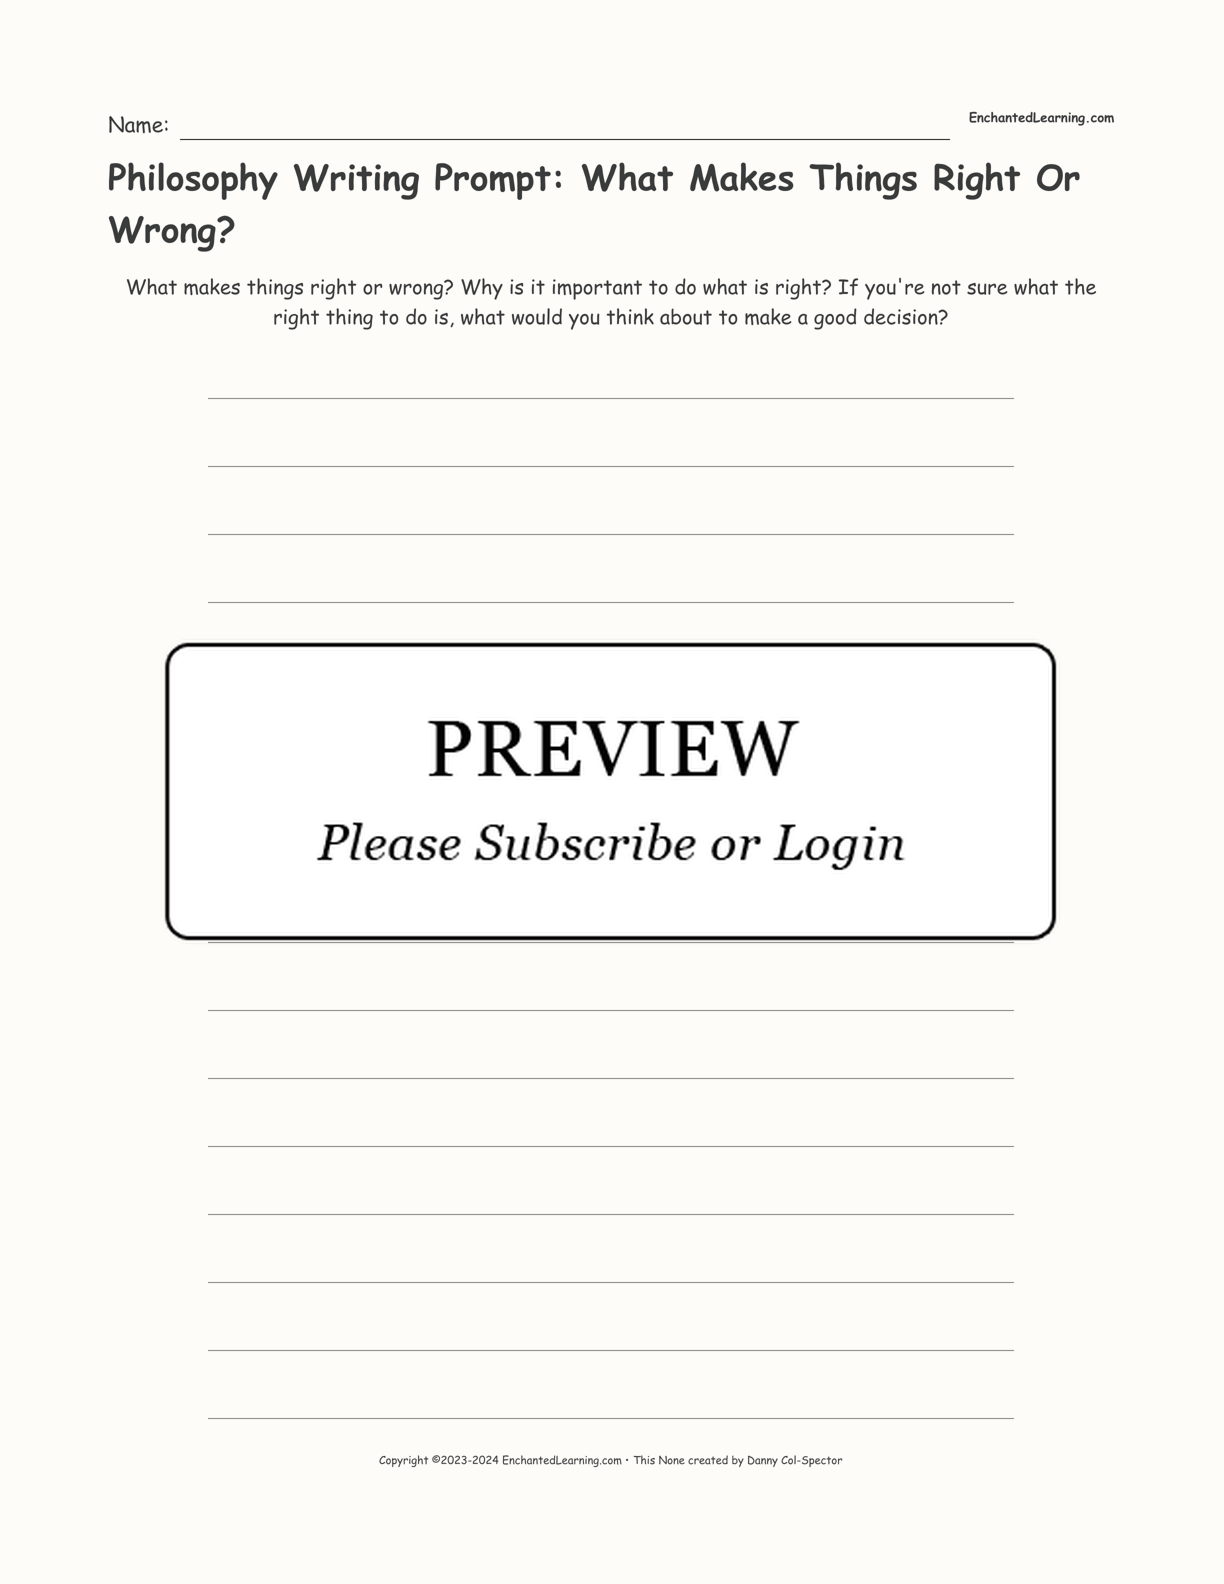 Philosophy Writing Prompt: What Makes Things Right Or Wrong? interactive printout page 1